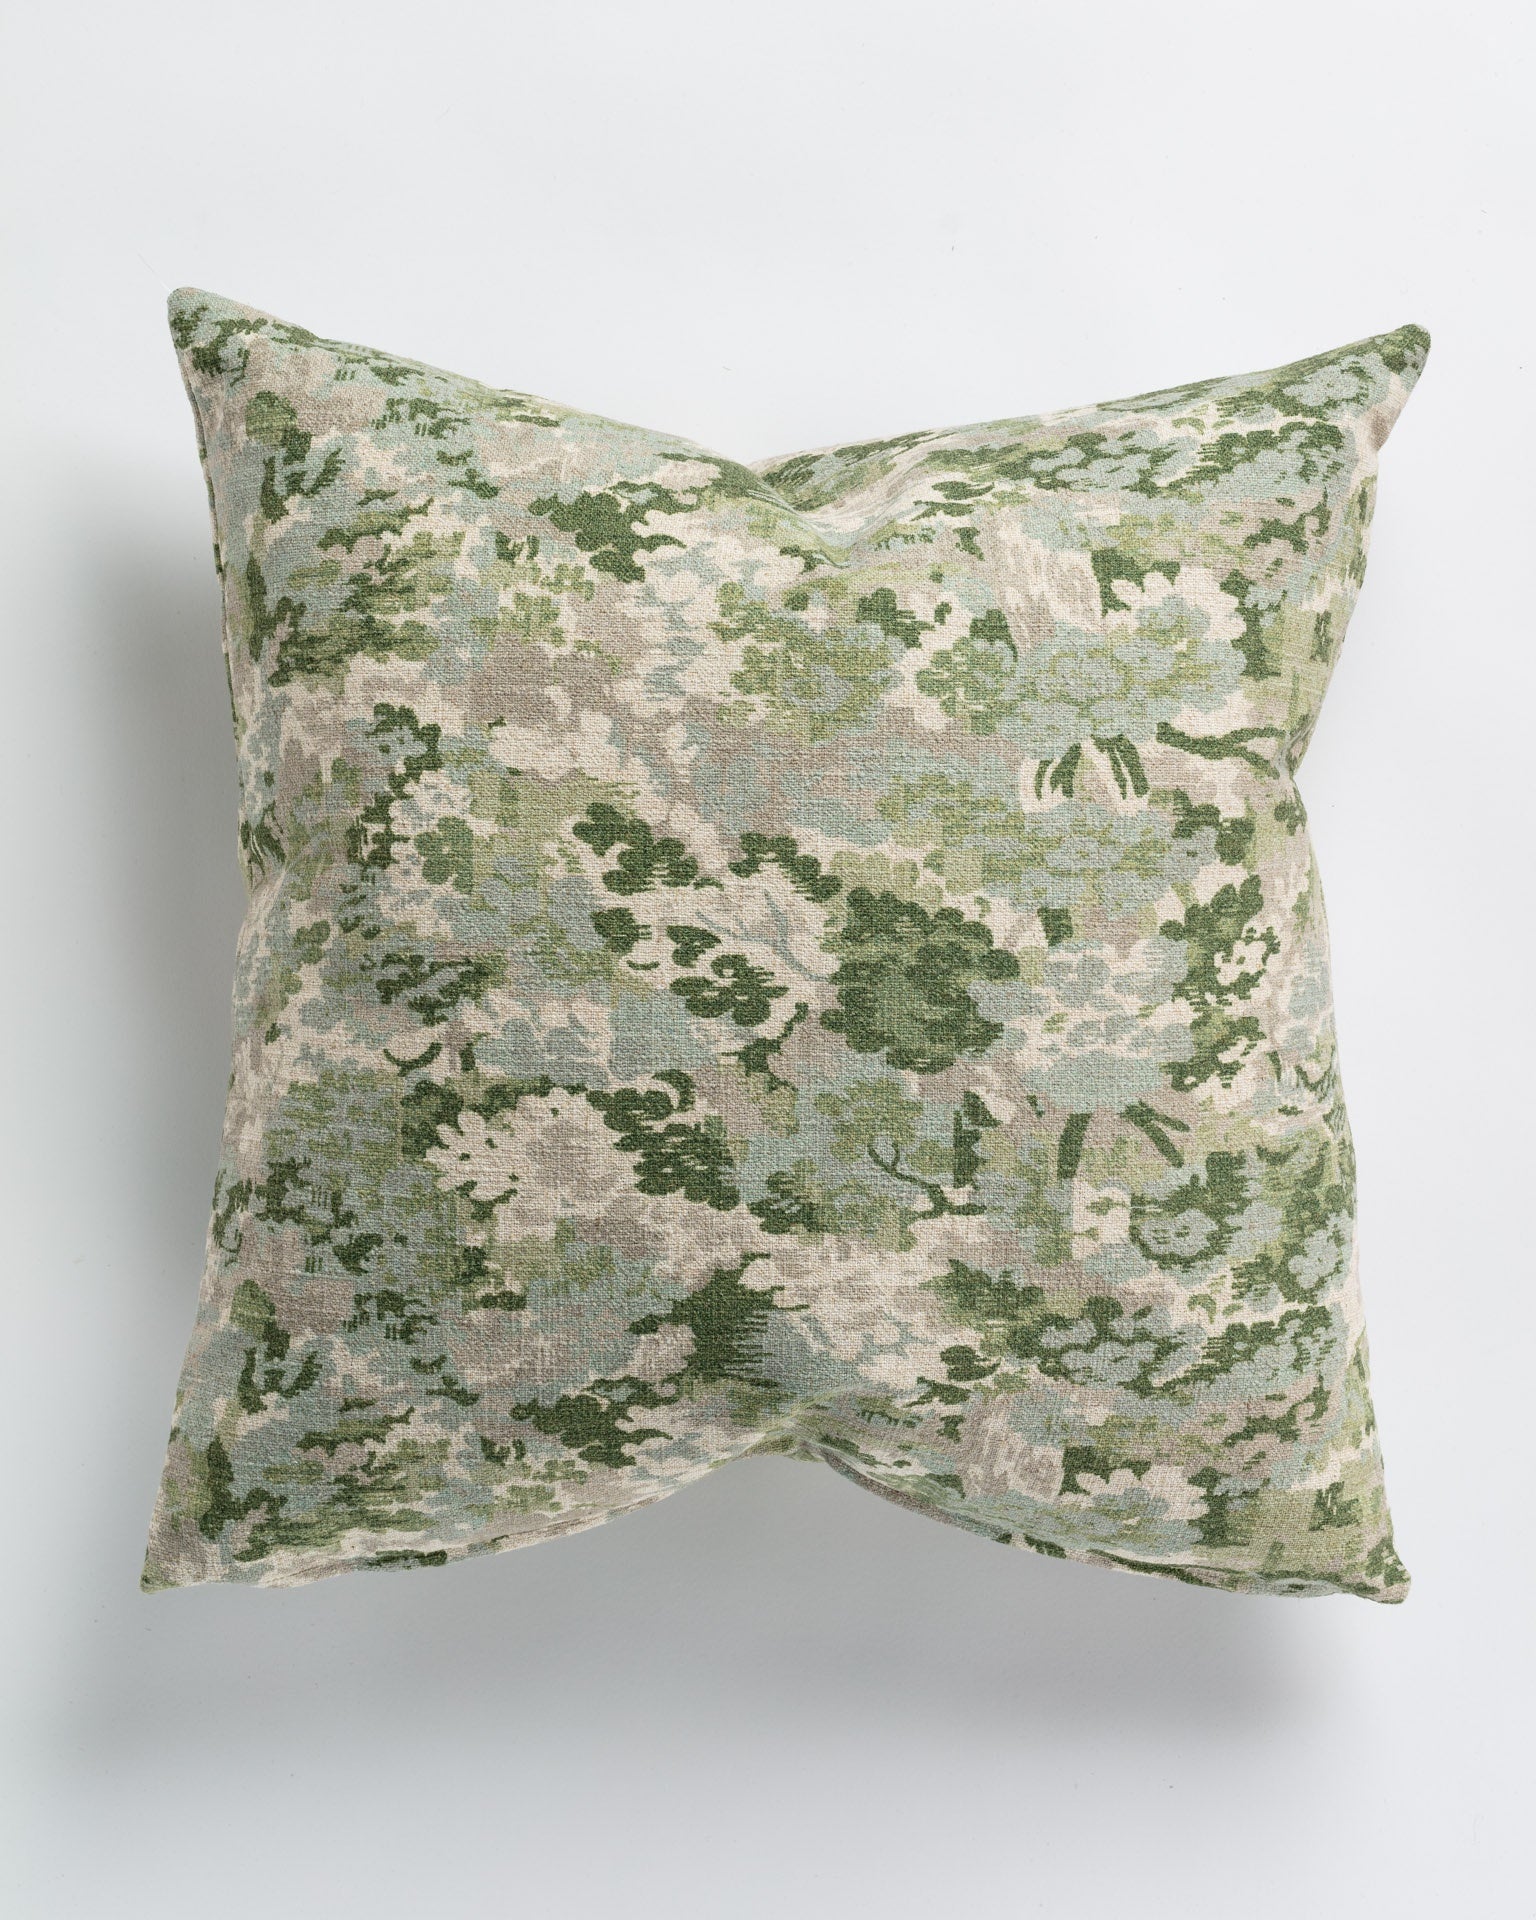 Gabby's Imperial Ivy Pillow 26x26, with a faded green floral pattern on a neutral background, photographed against a white surface in Scottsdale, Arizona.